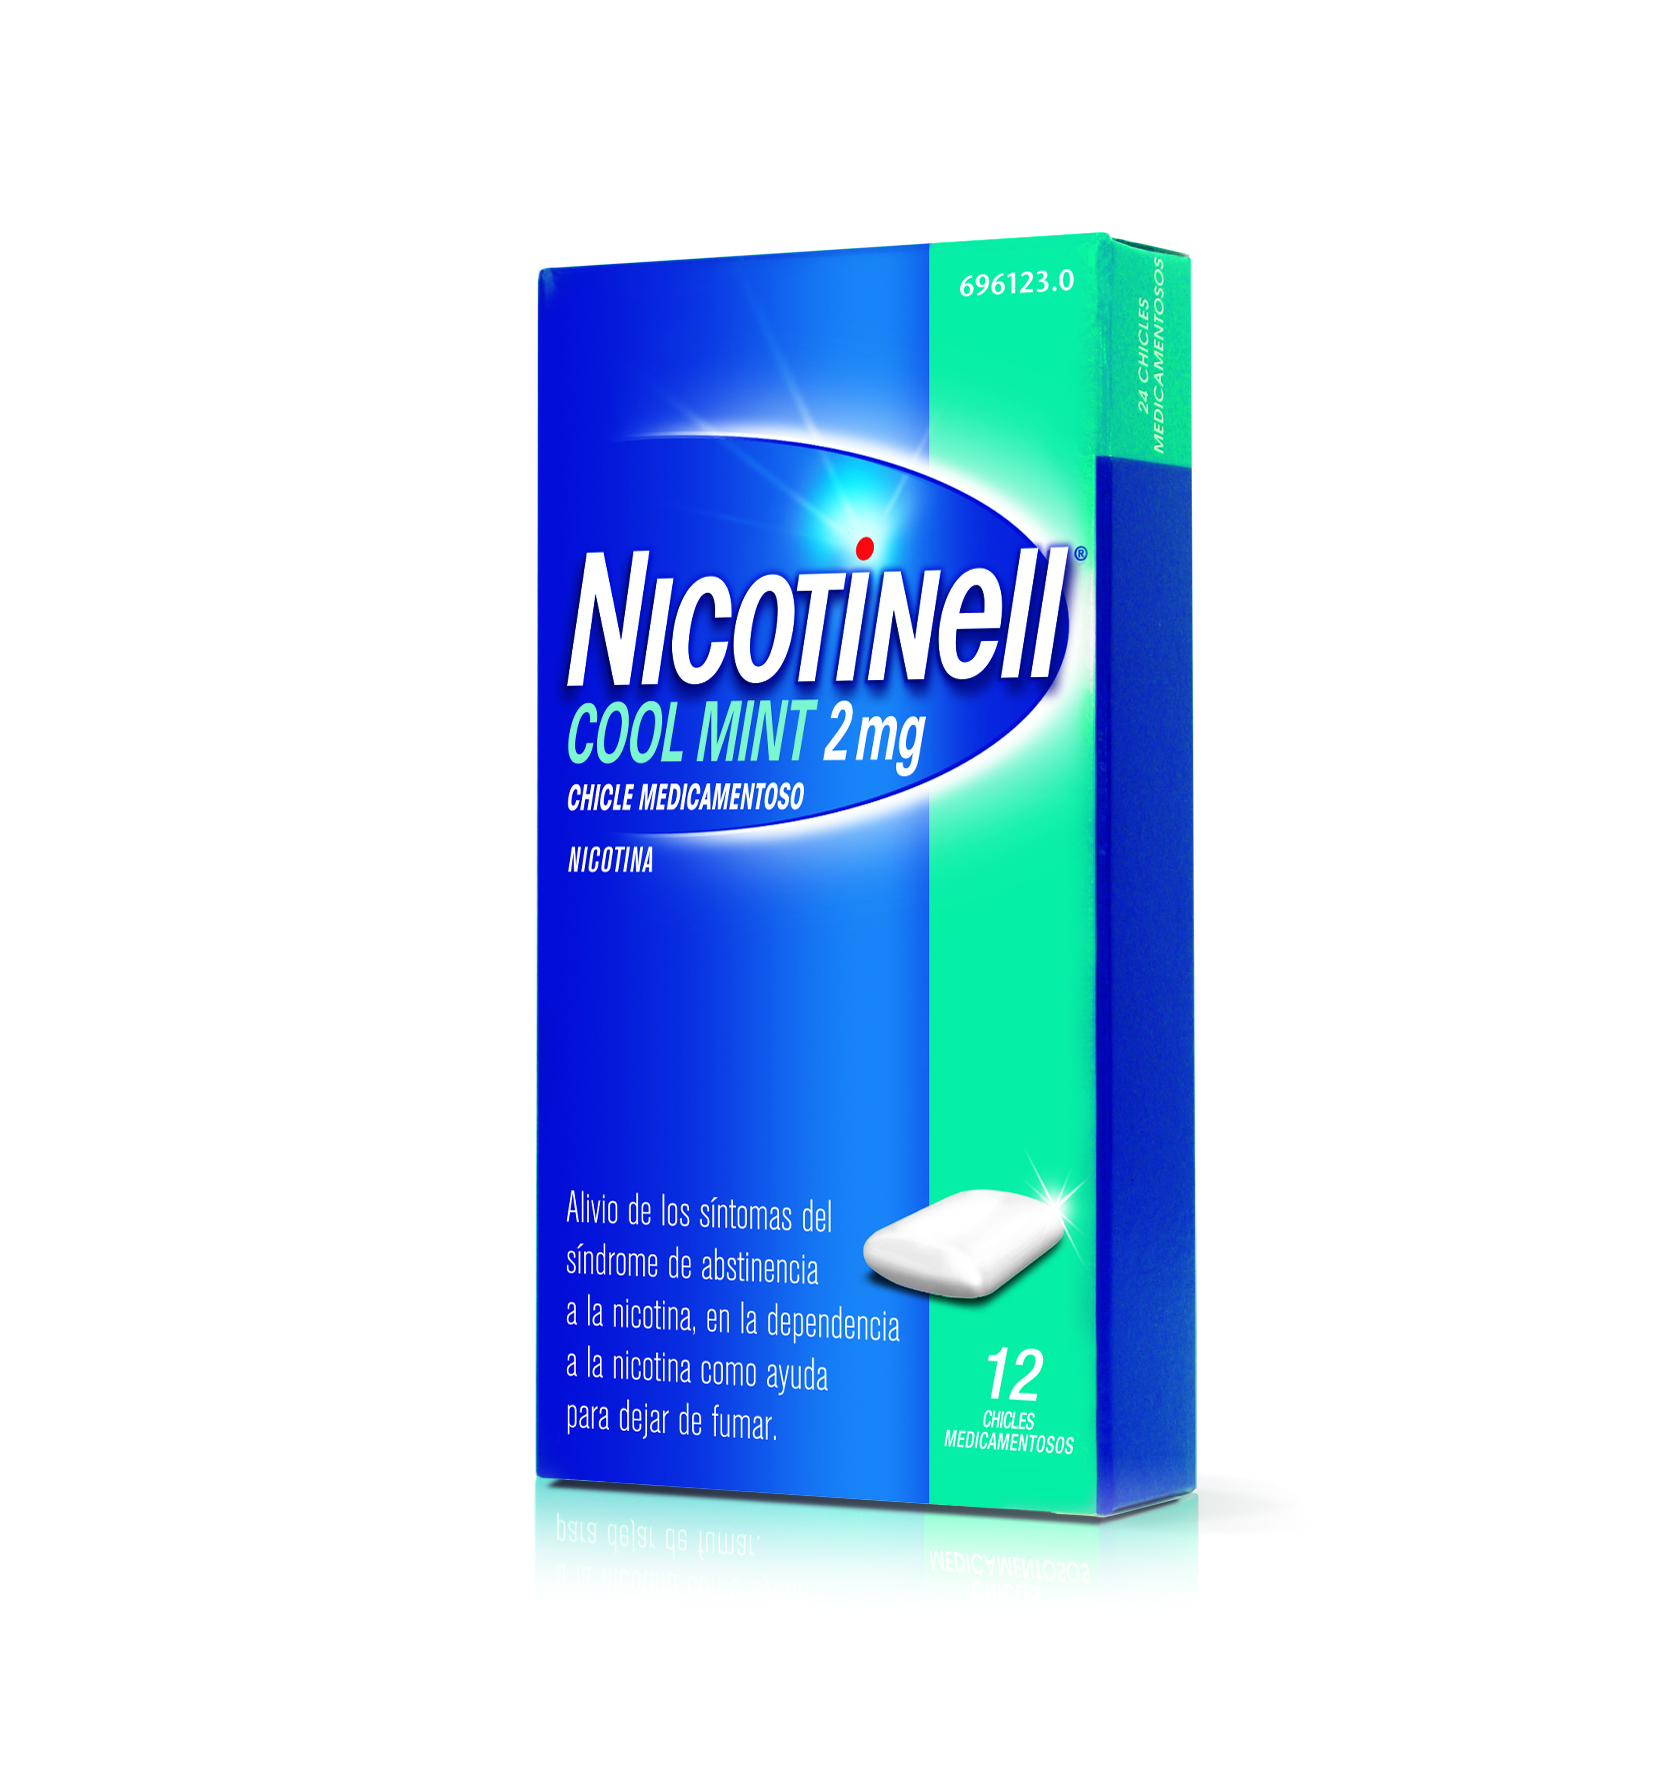 NICOTINELL COOL MINT 2 MG 12 CHICLES RECUBIERTOS